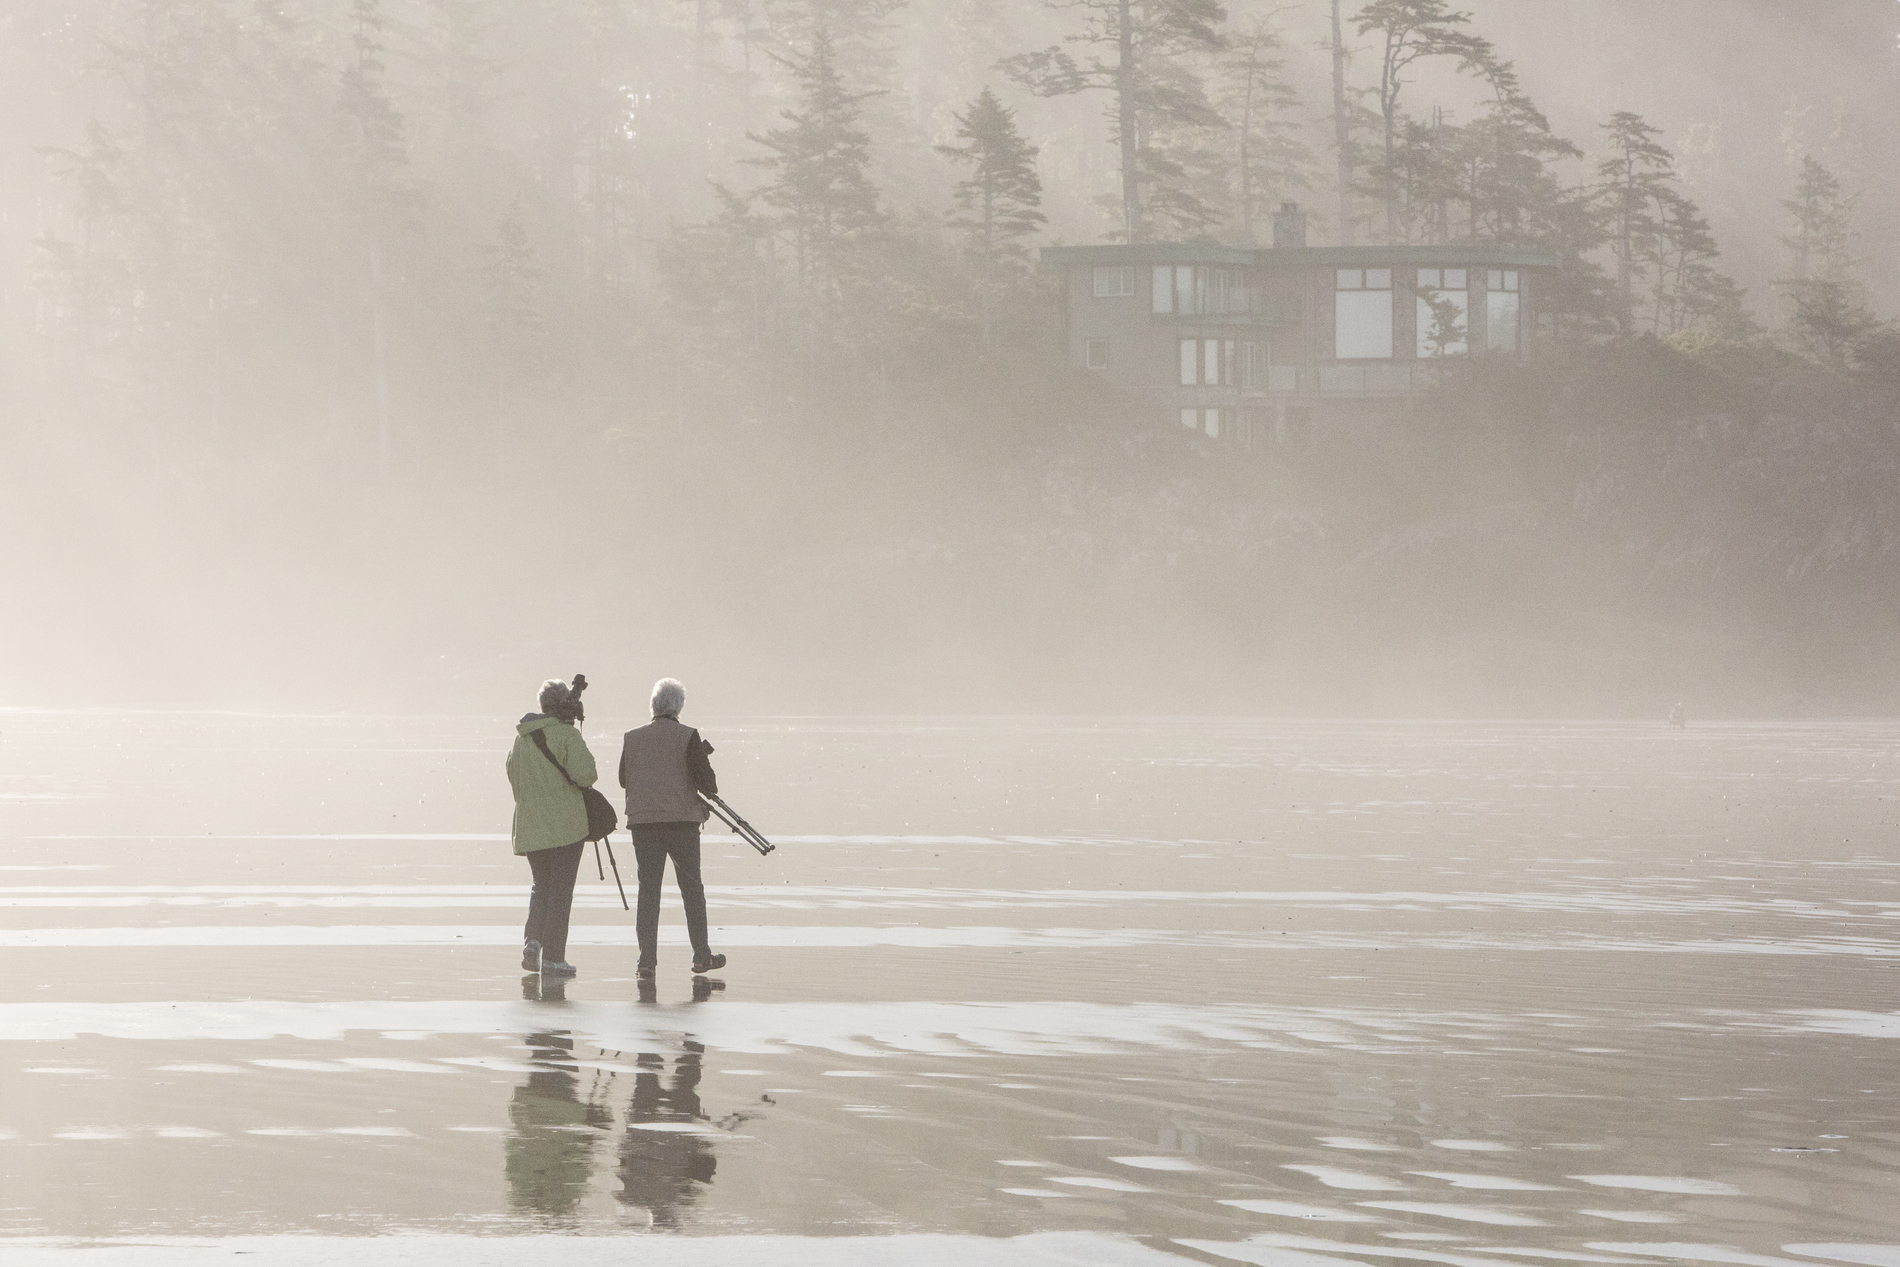 Two people walk along the beach at low tide in the fog. A building and trees are seen in the background.